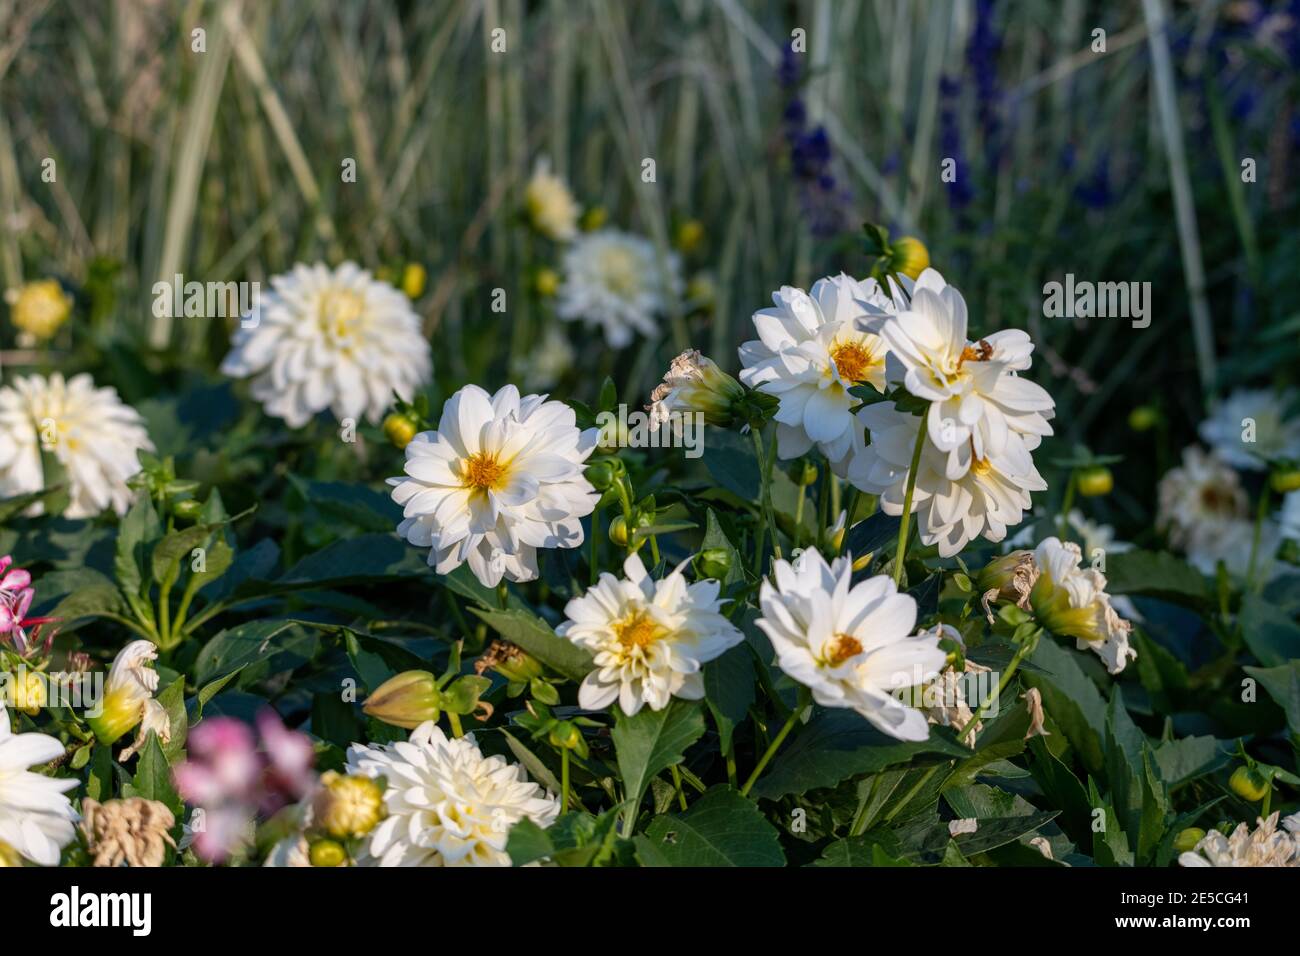 Group of Dahlia Flowers in a garden Stock Photo